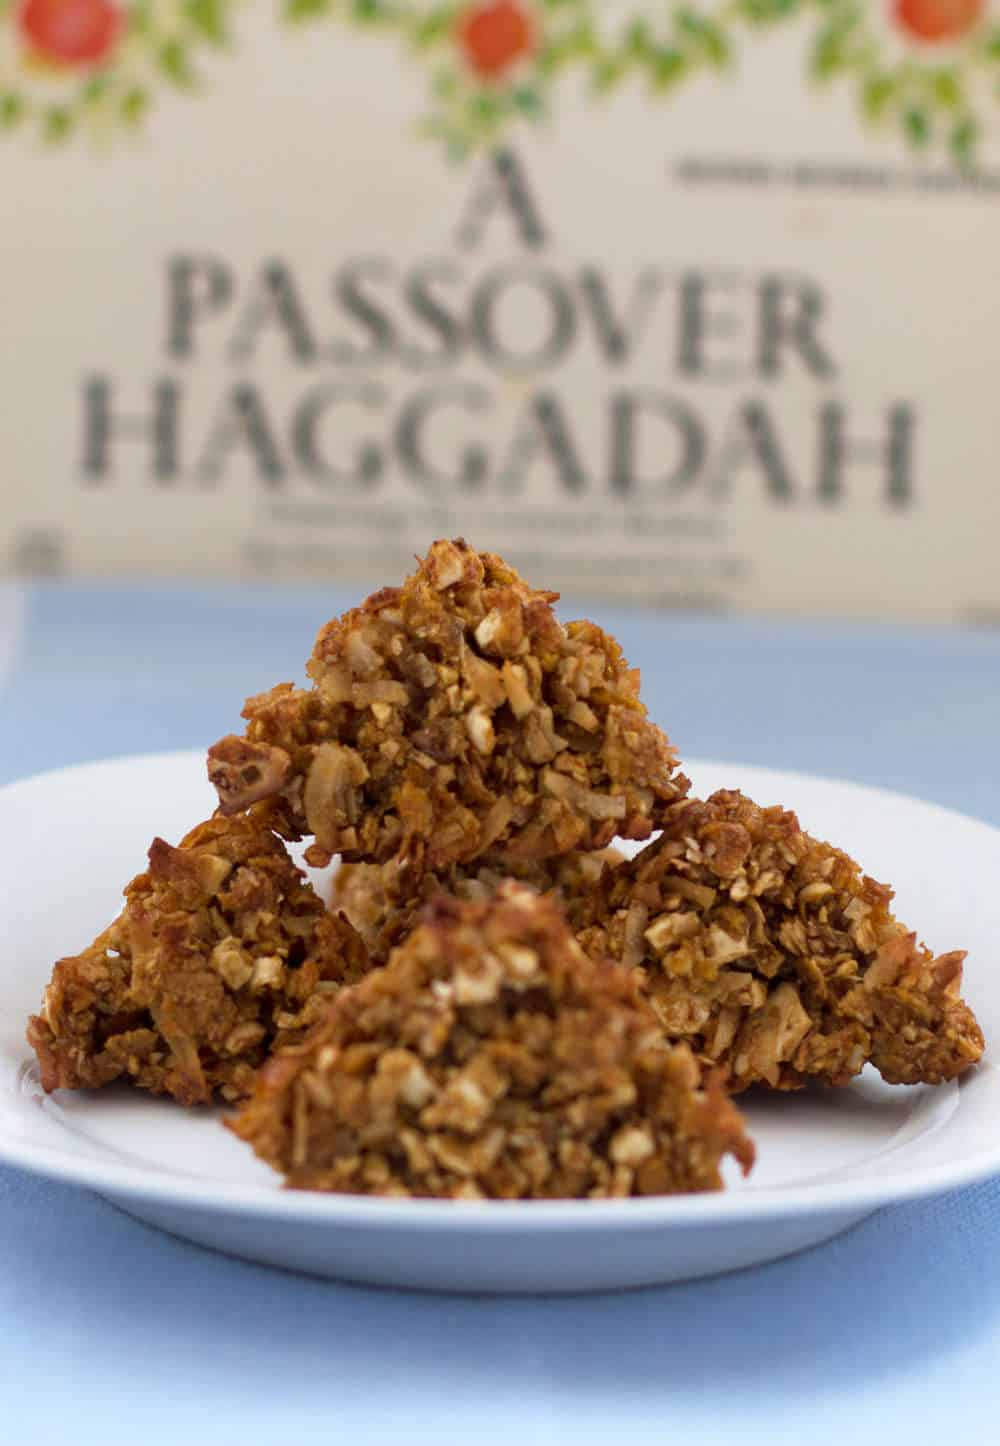 Nut-free Passover macaroons will be at my seder this year. 